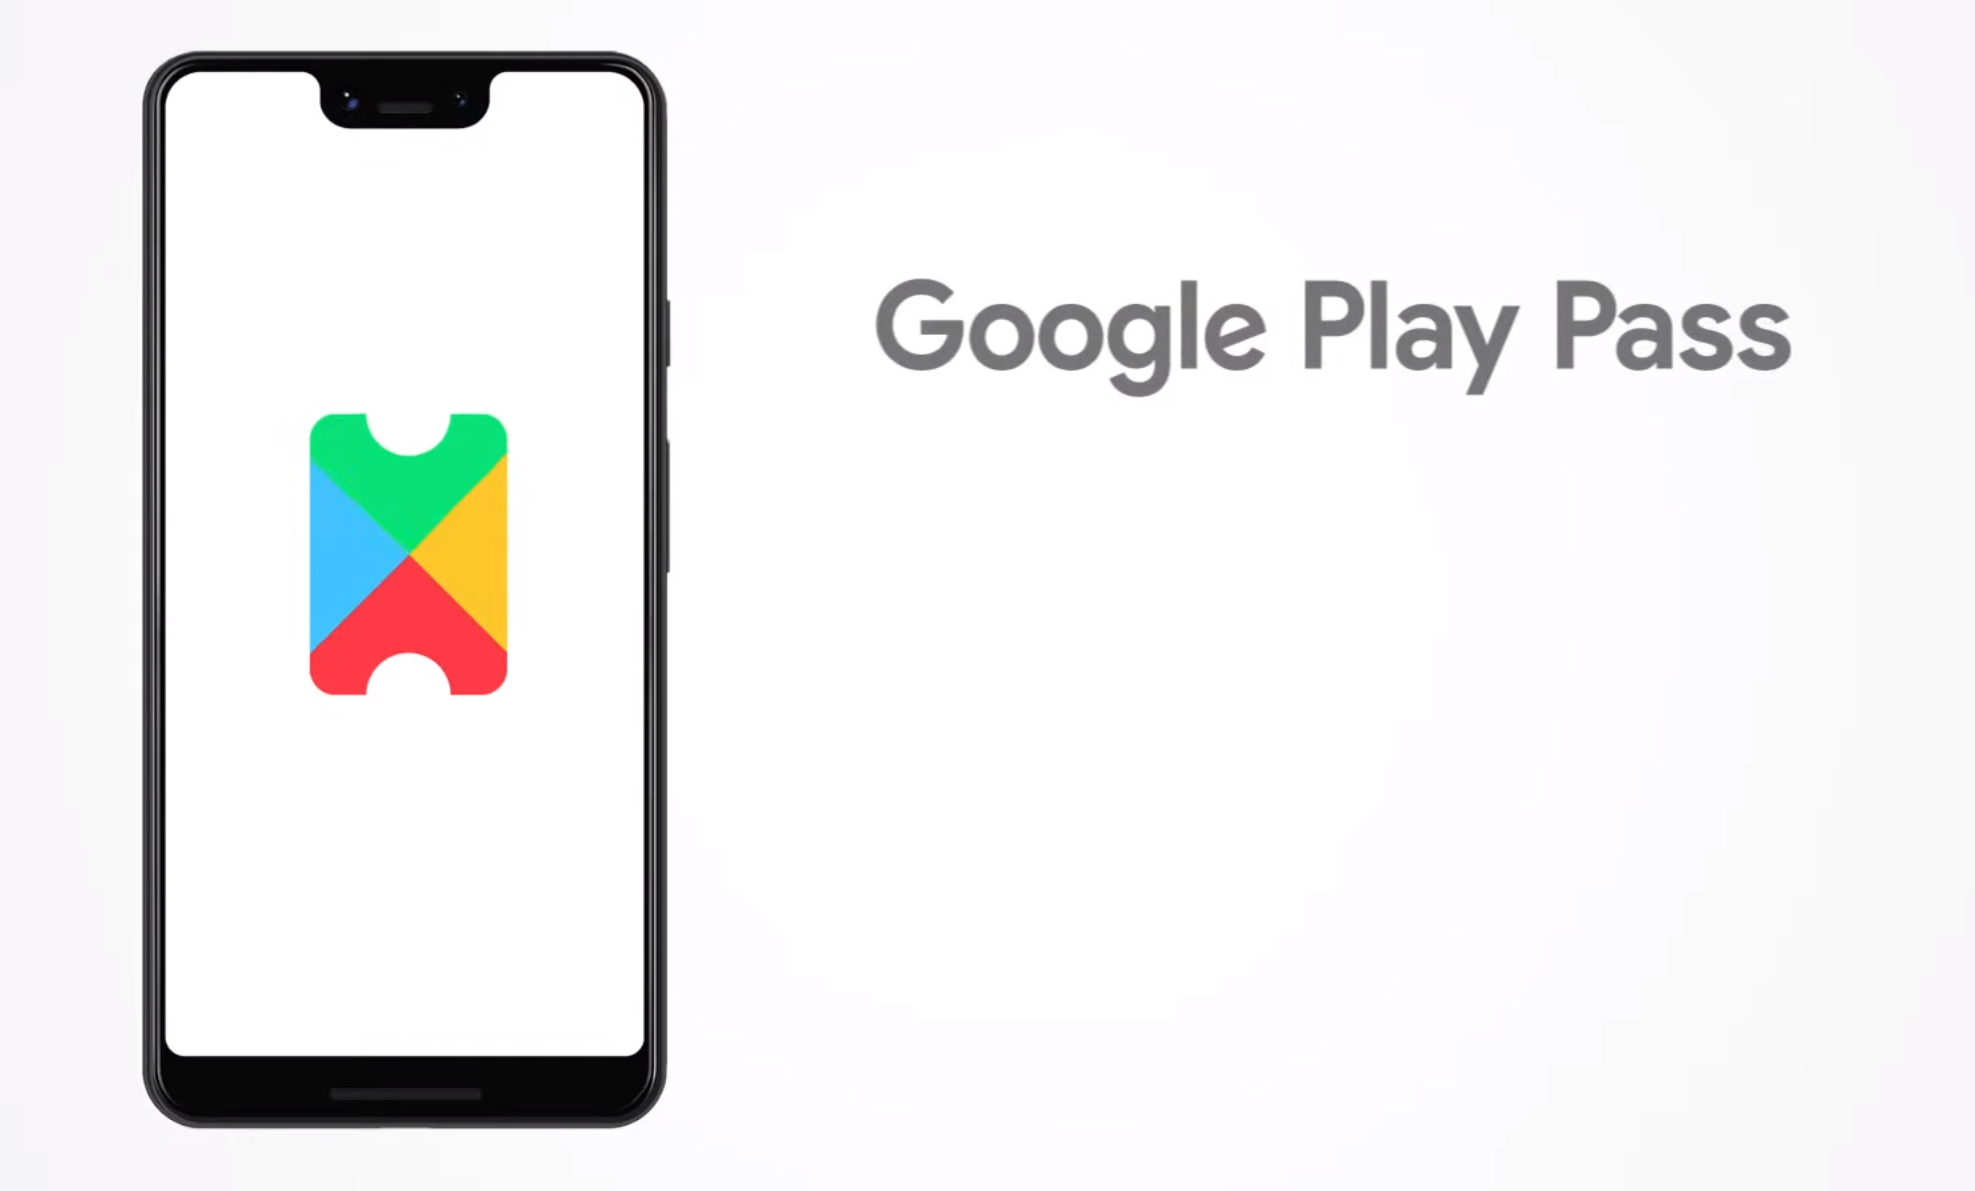 Google Play Pass: The full list of included game and app titles!